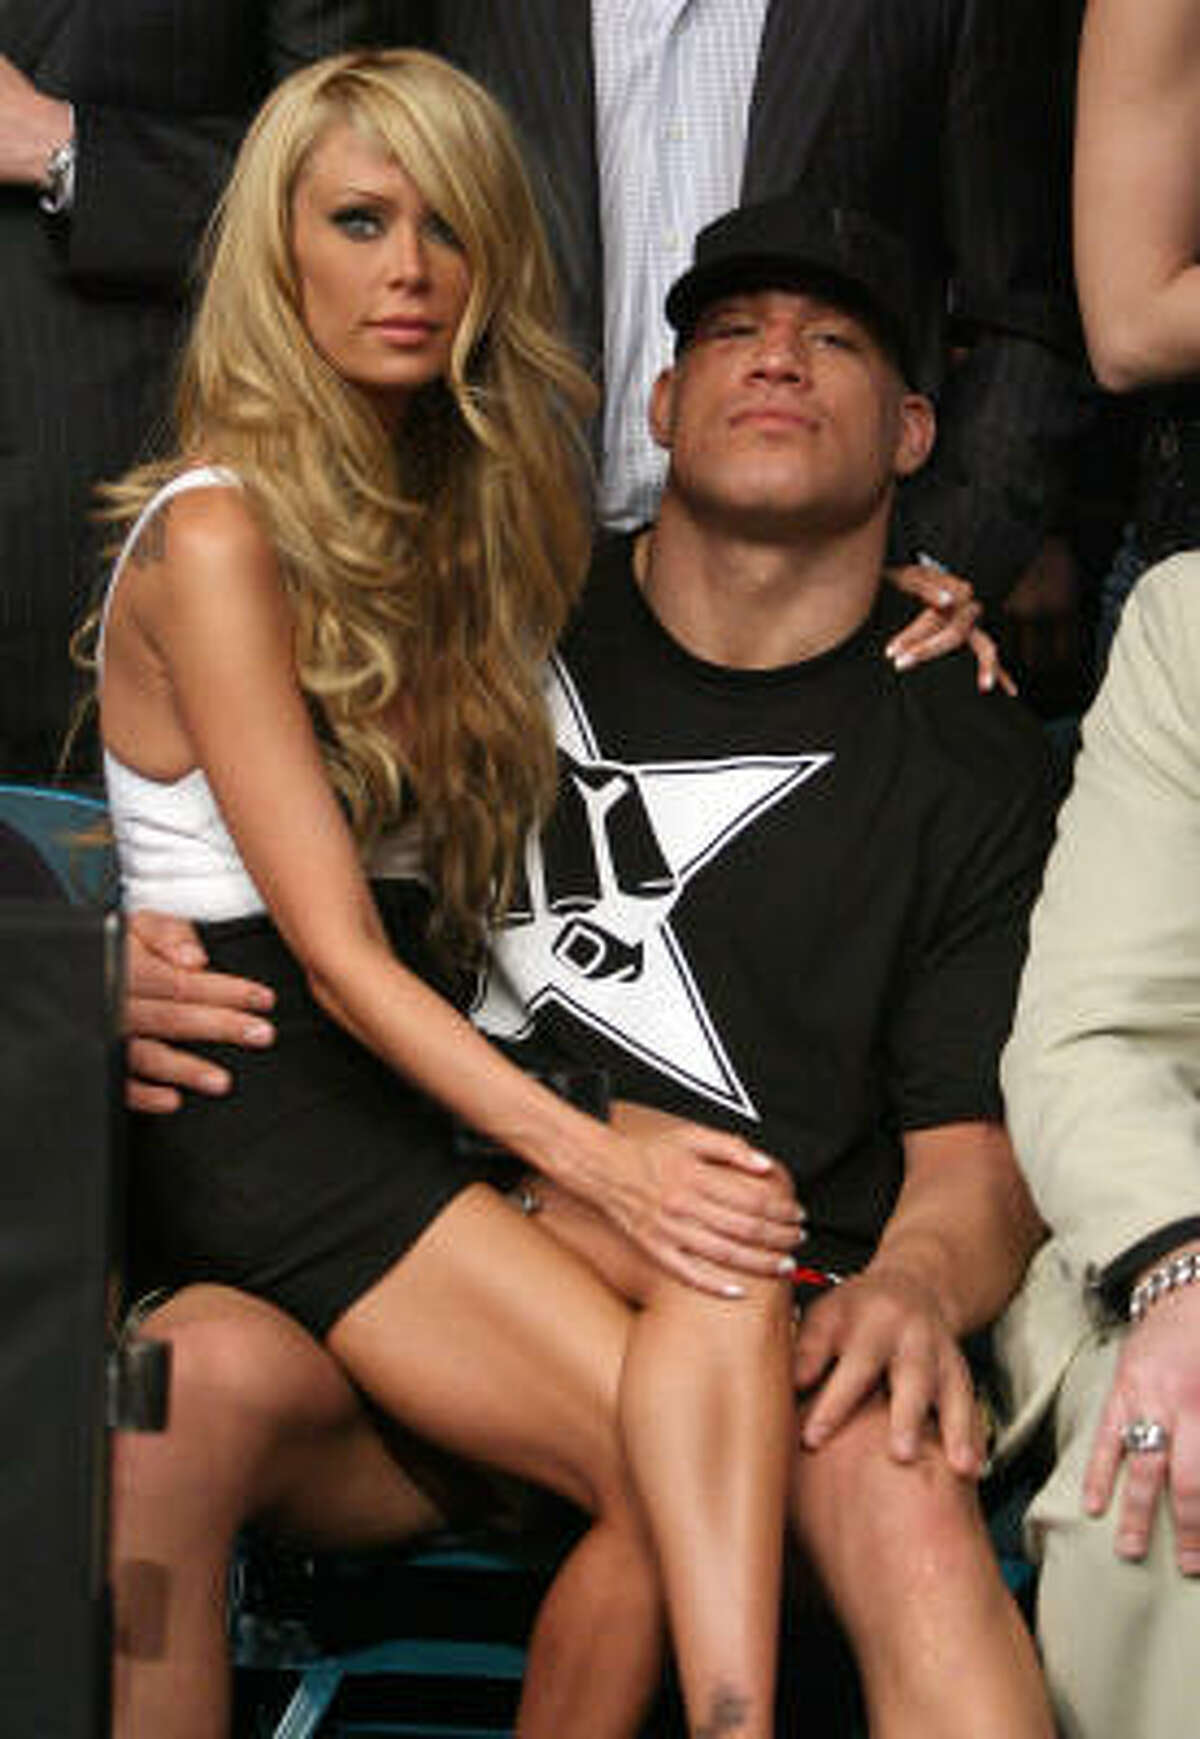 FILE - In this May 24, 2008 file photo, mixed martial arts star Tito Ortiz, right, is seen with Jenna Jameson after his fight at UFC 84 at the MGM Grand Garden Arena in Las Vegas. Ortiz was arrested on suspicion of domestic violence Monday, April 26, 2010, at the home he shares with Jameson.